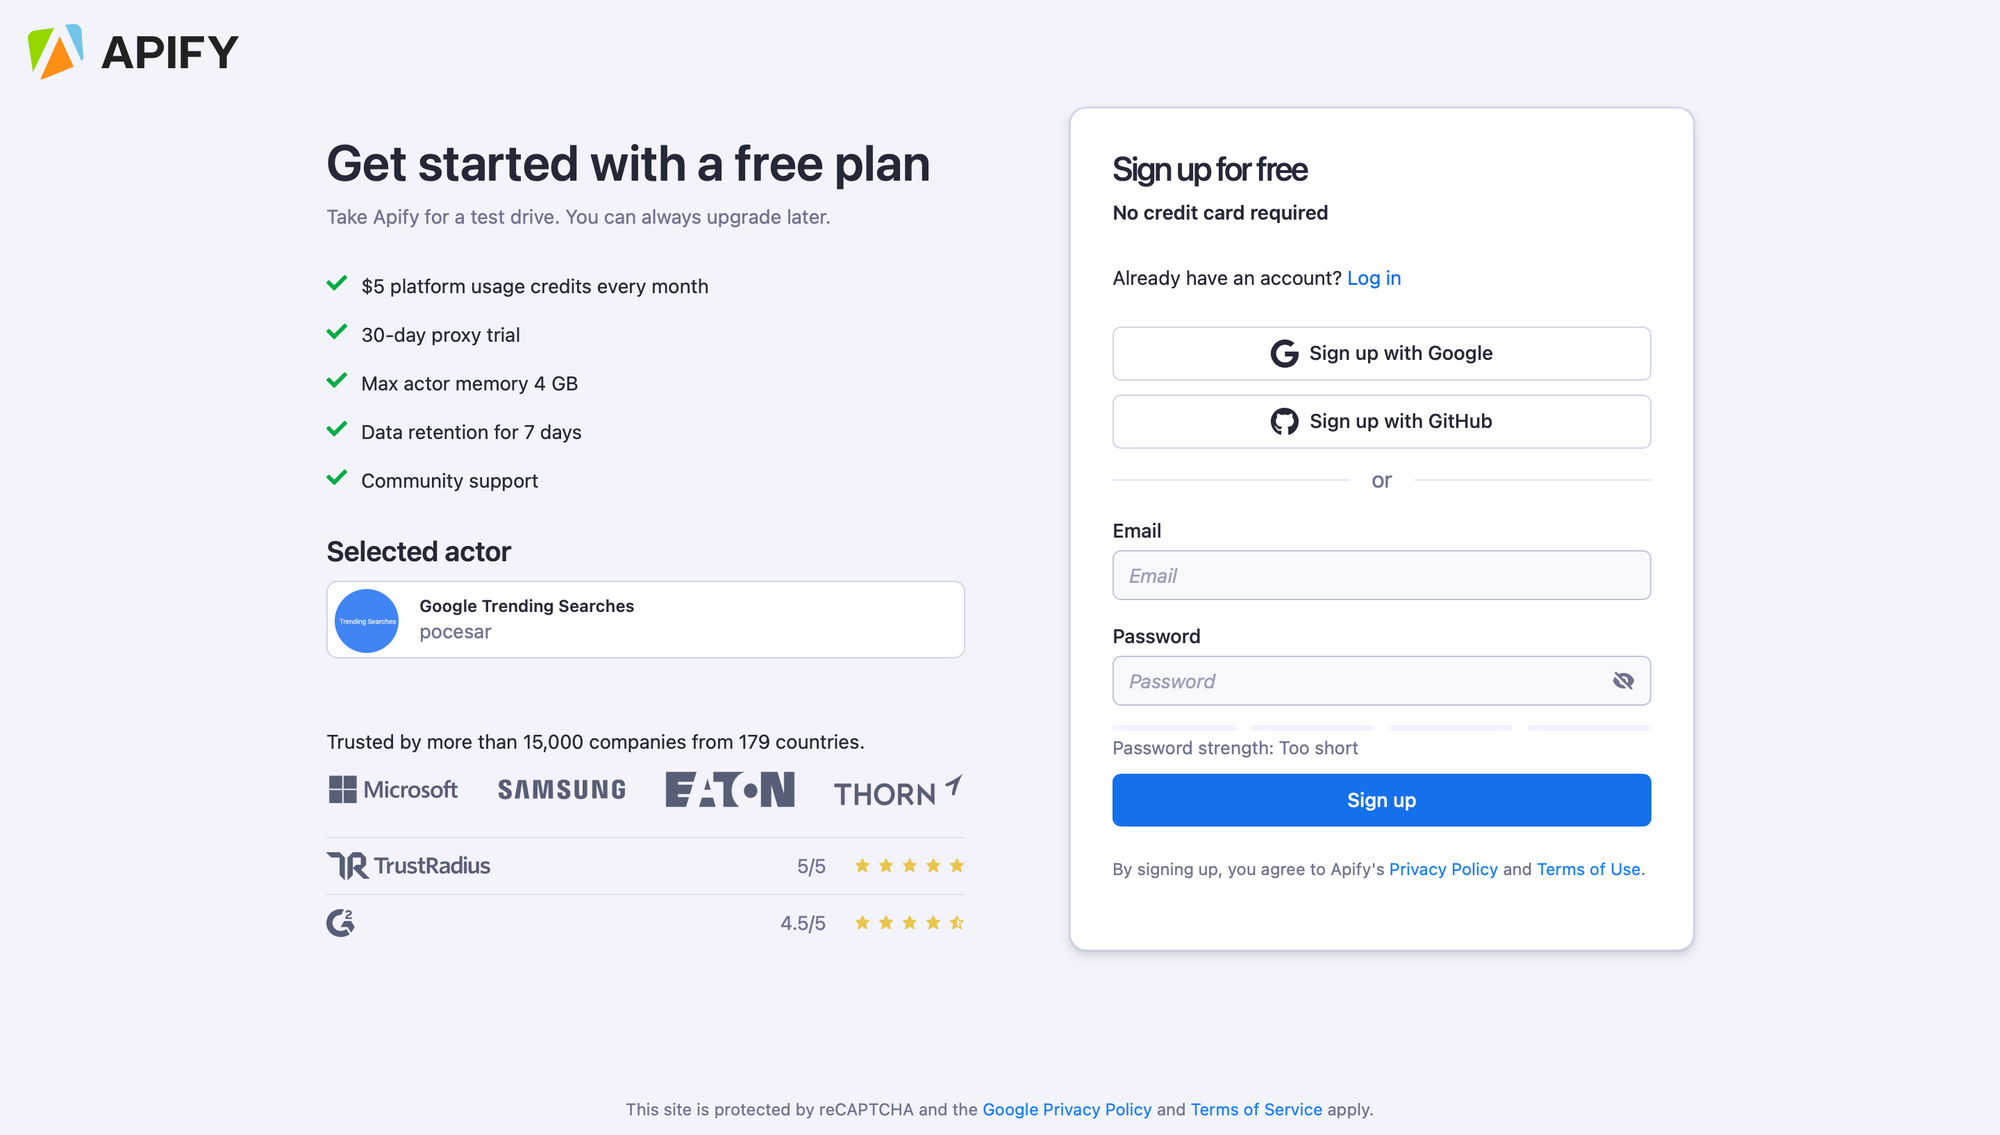 Screenshot of the login form with options for quick sign in as well as details about the free plan and companies using the platform.